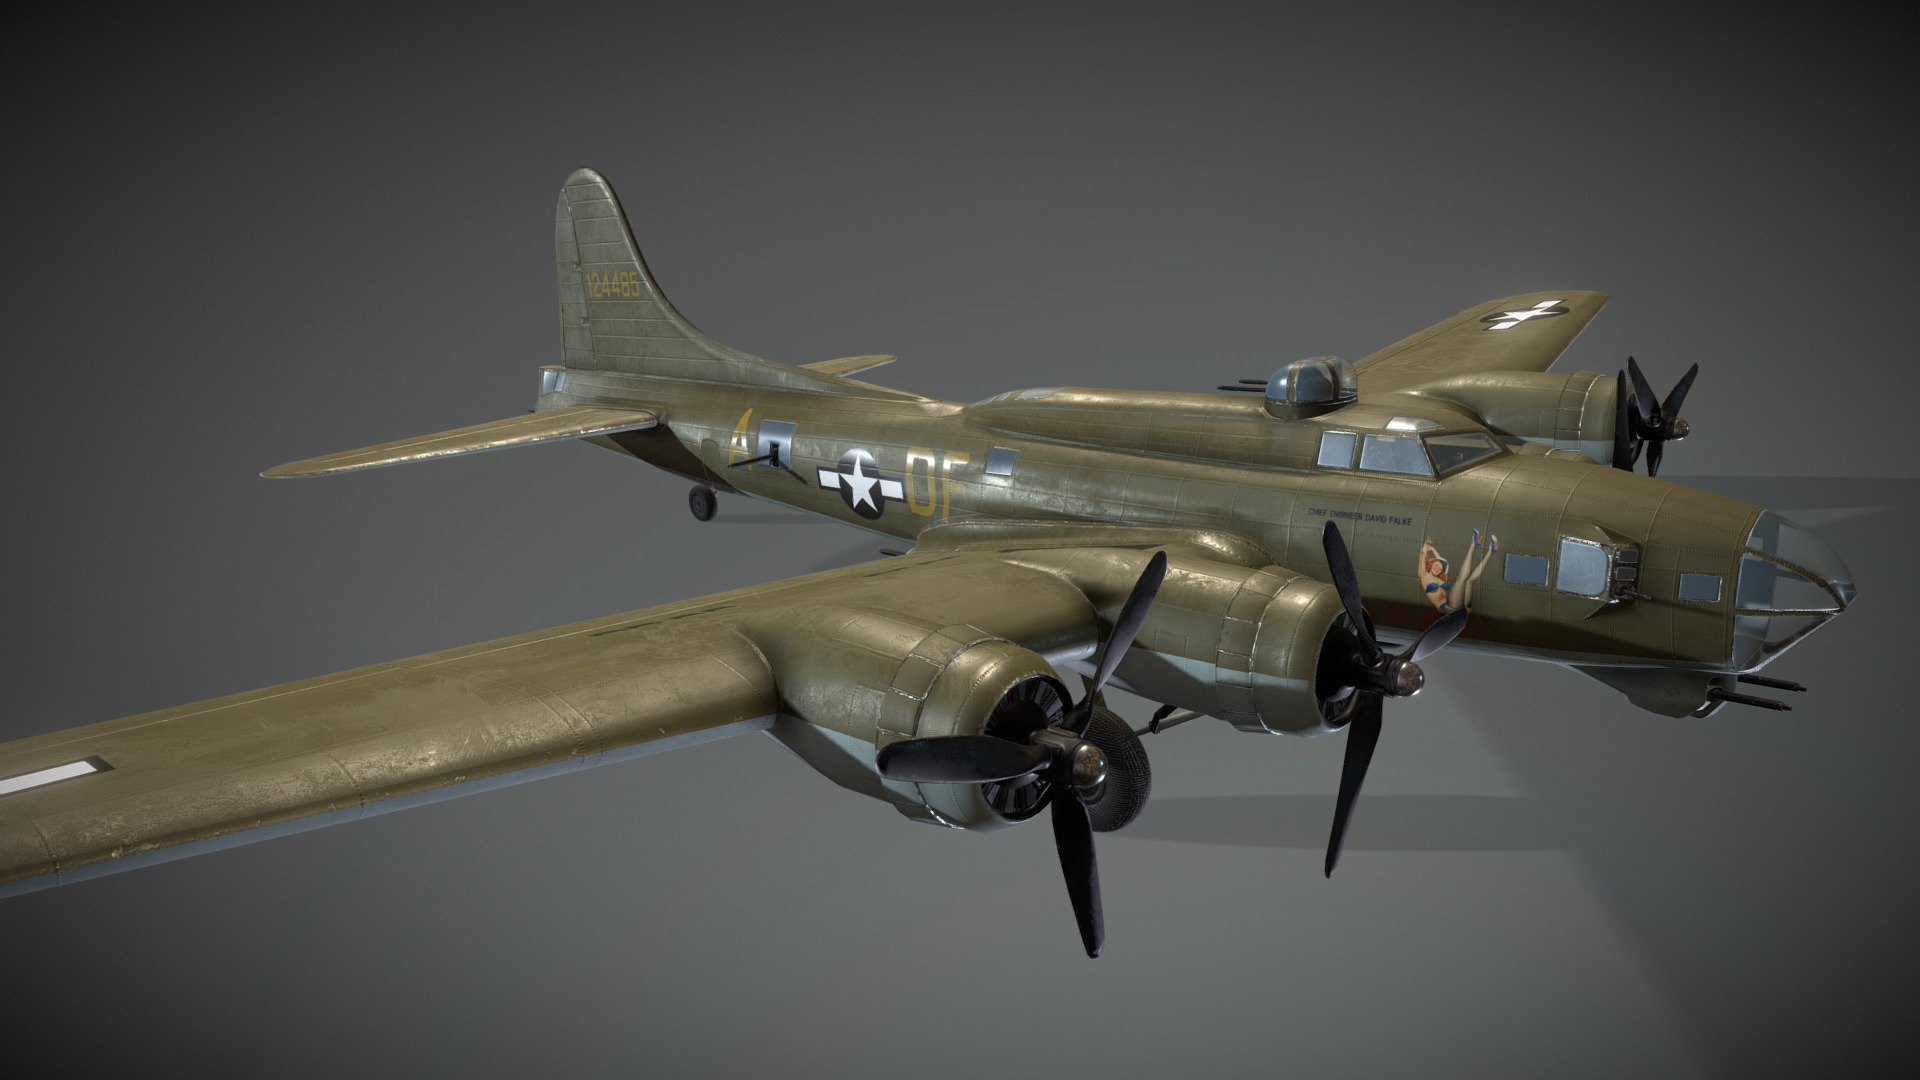 B-17 Flying Fortress

3D Model for Escape Germany (PC-Game)

Fully rigged an animated ingame. Flight Example BF109: https://www.youtube.com/watch?v=jb6zUBnfUZE&amp;t=8s

Model + Textures by: David Falke

Rigged + Animations by: Spaehling

Website: https://www.grip420.com/

Discord: Follow us on Discord

Facebook Follow us on Facebook

Game  Escape Germany - Escape Germany - B-17 Flying Fortress - 3D model by GRIP420 3d model